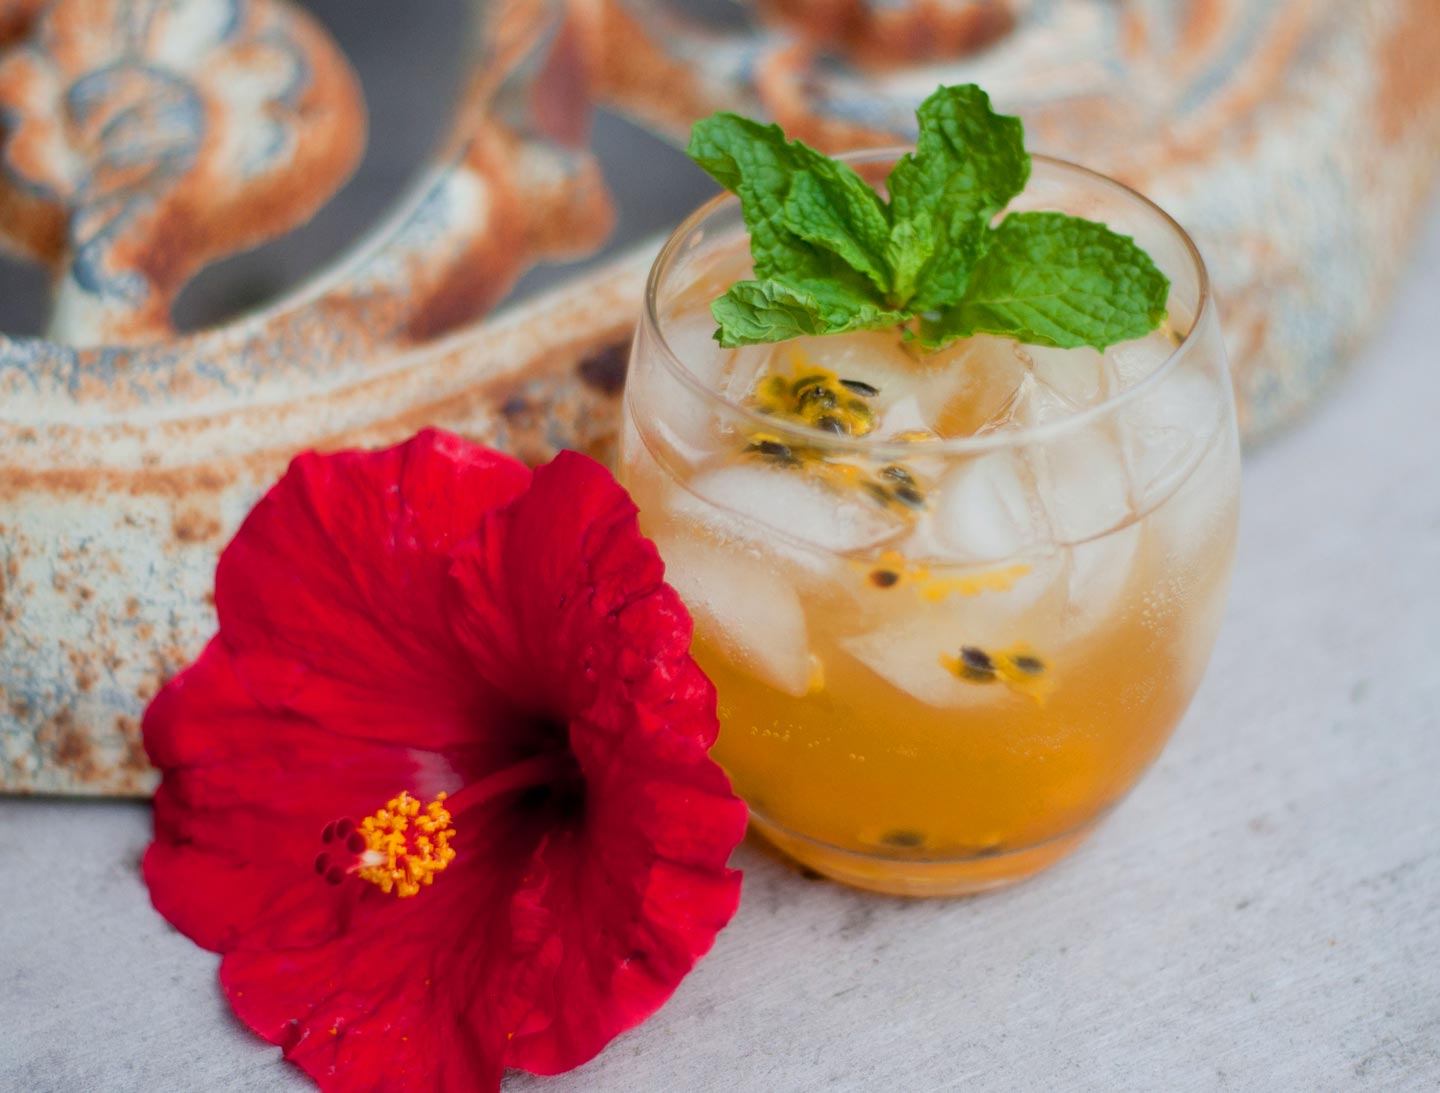 Mauka Mule Cocktail Recipe with a red hibiscus flower next to the glass and a sprig of mint as a garnish